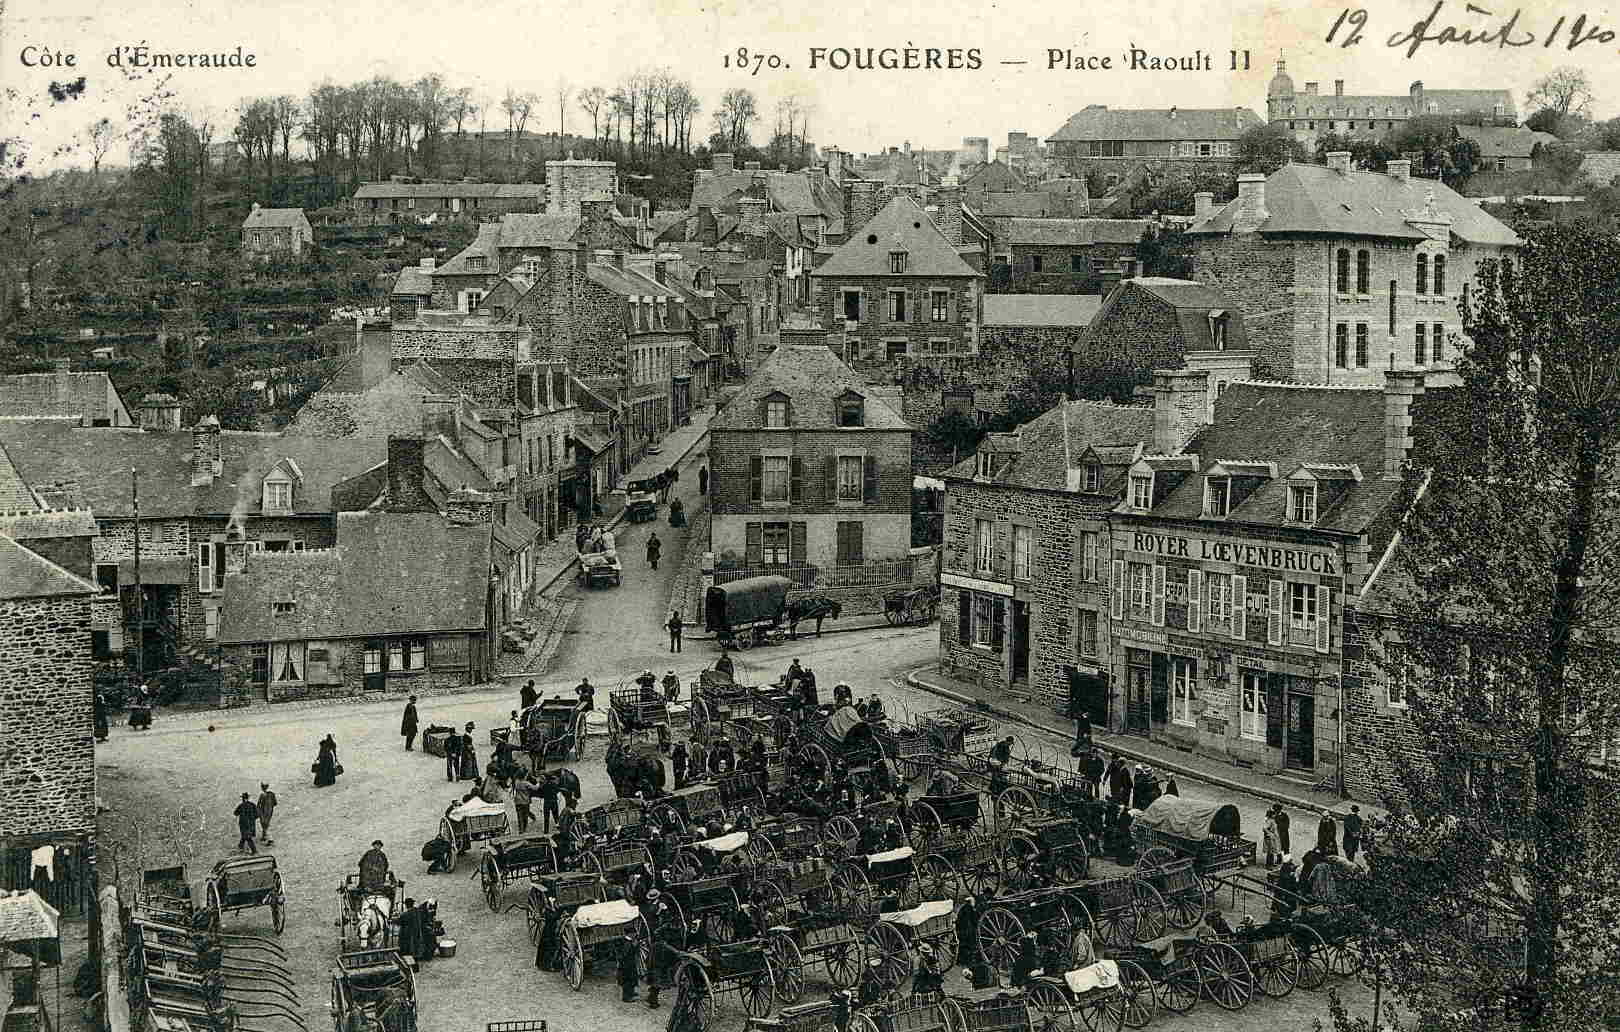 FOUGERES - Place Raoult - Fougeres